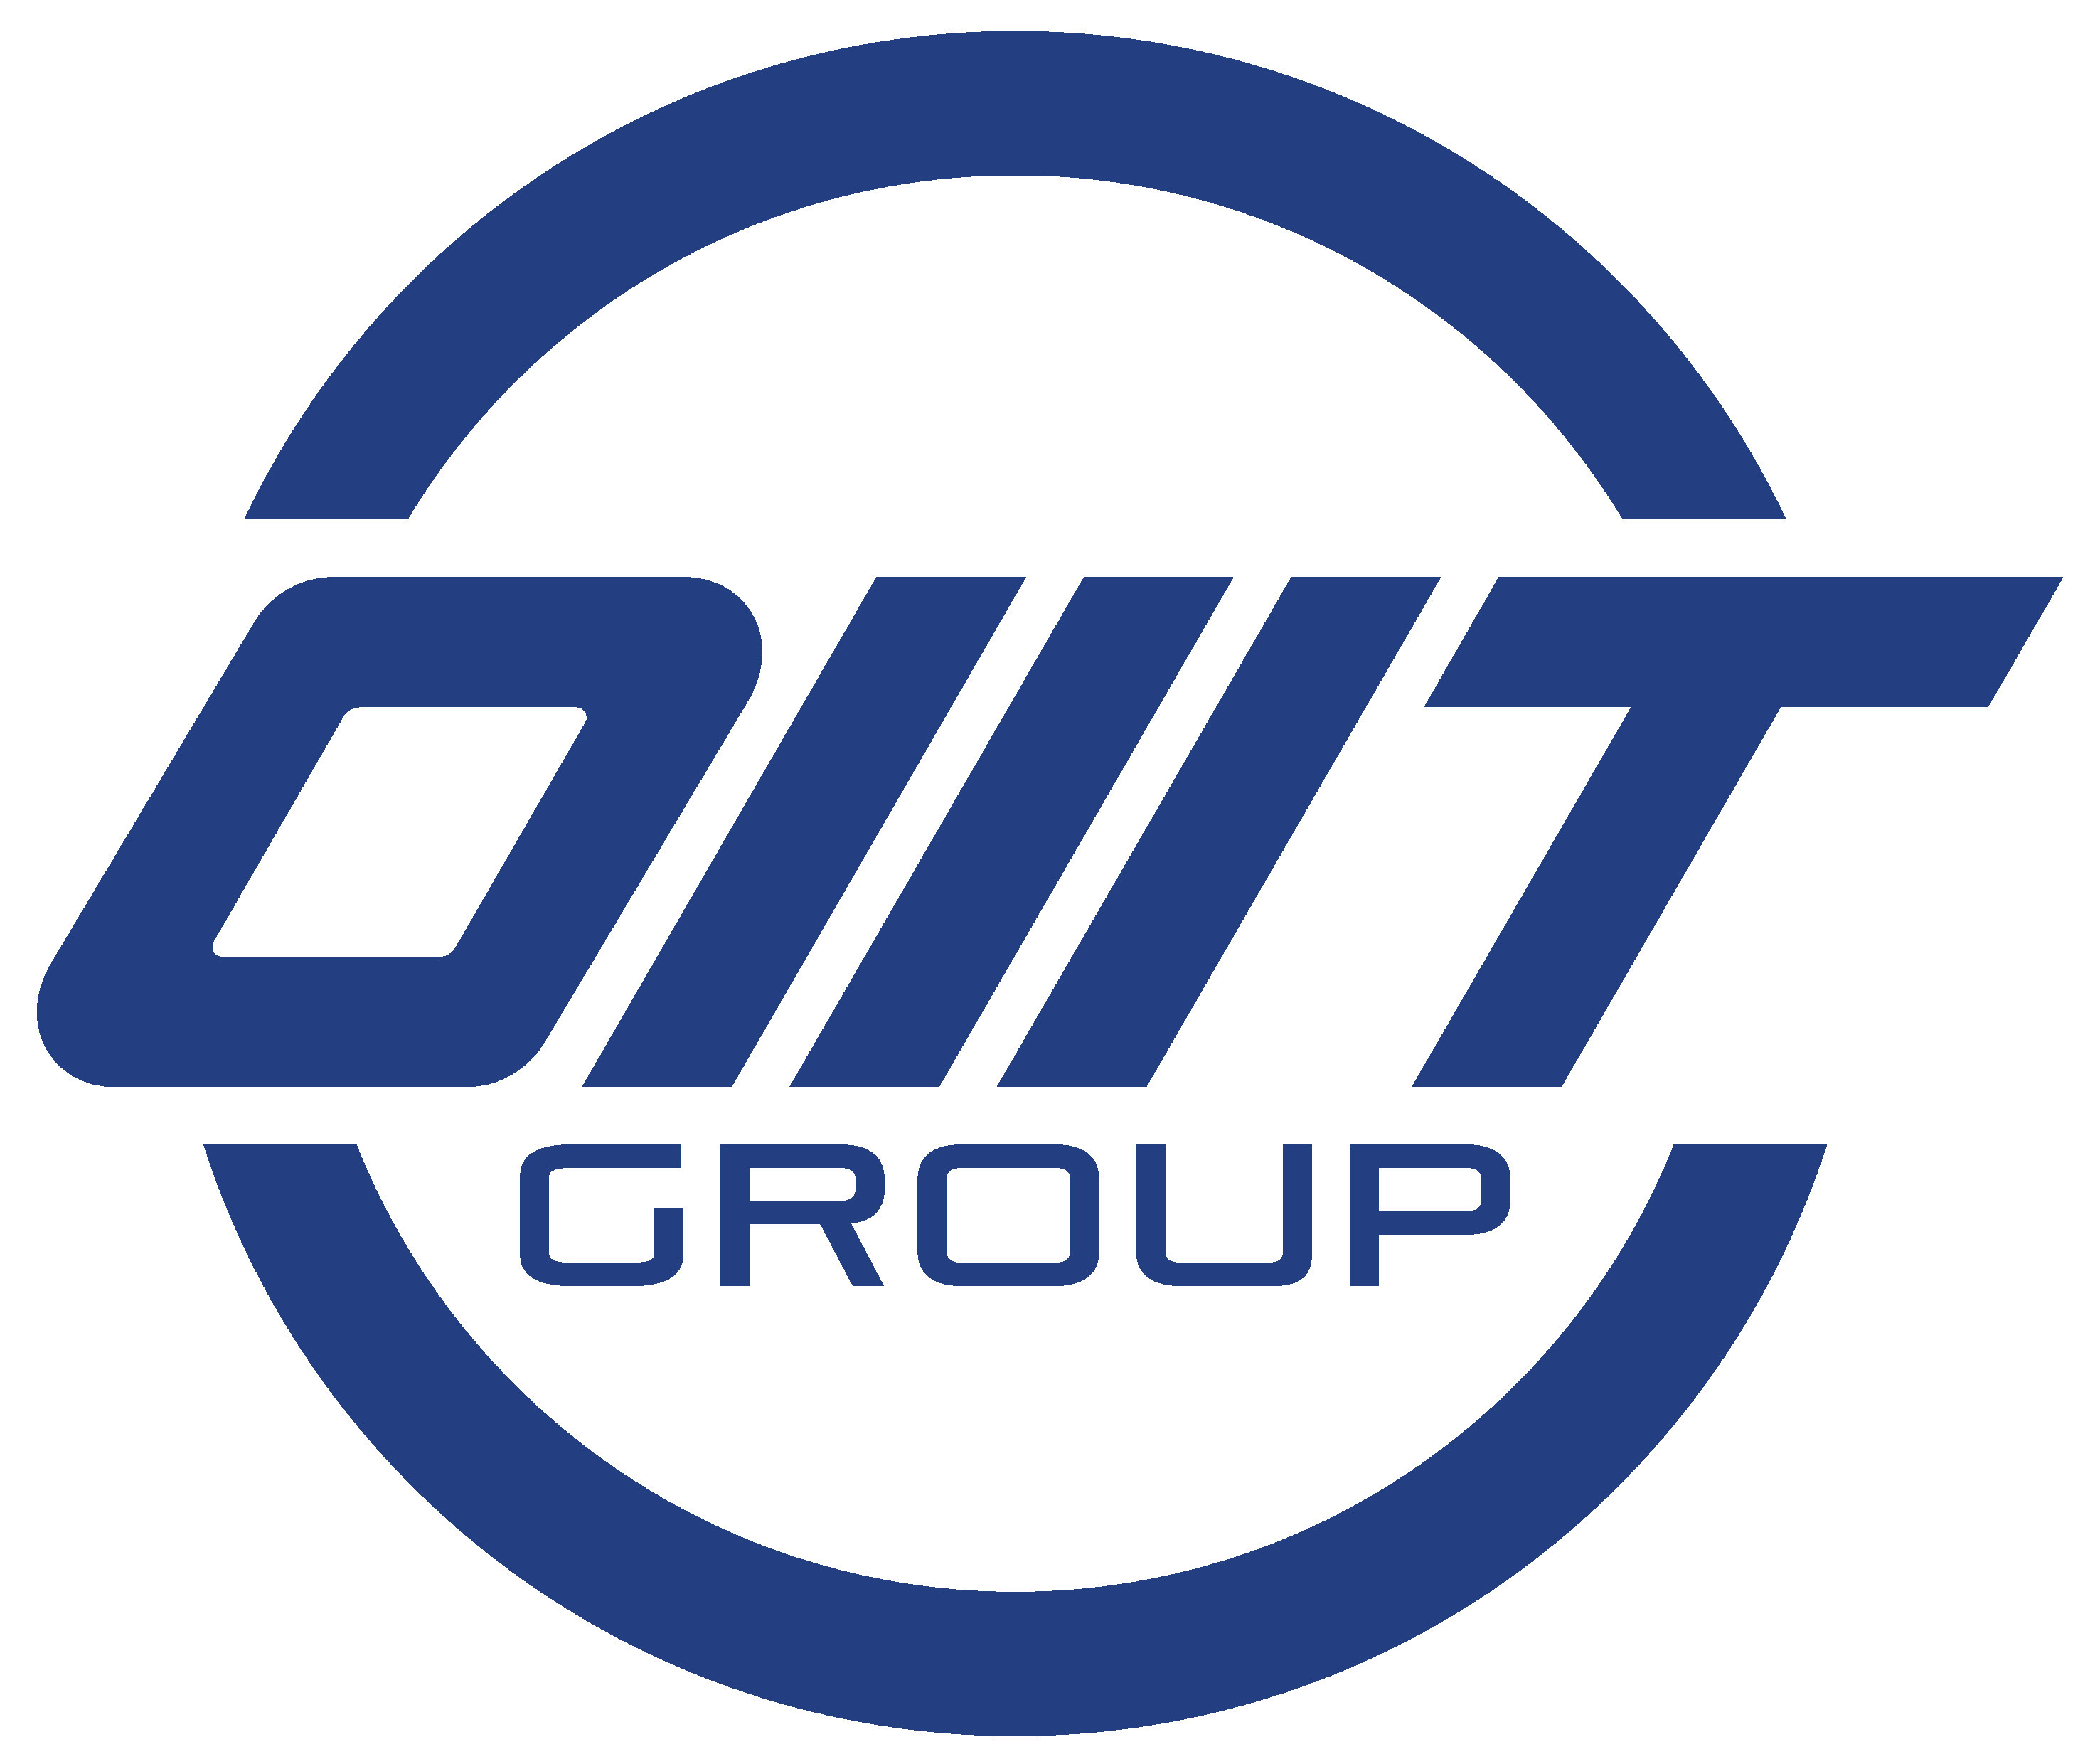 OMT Group